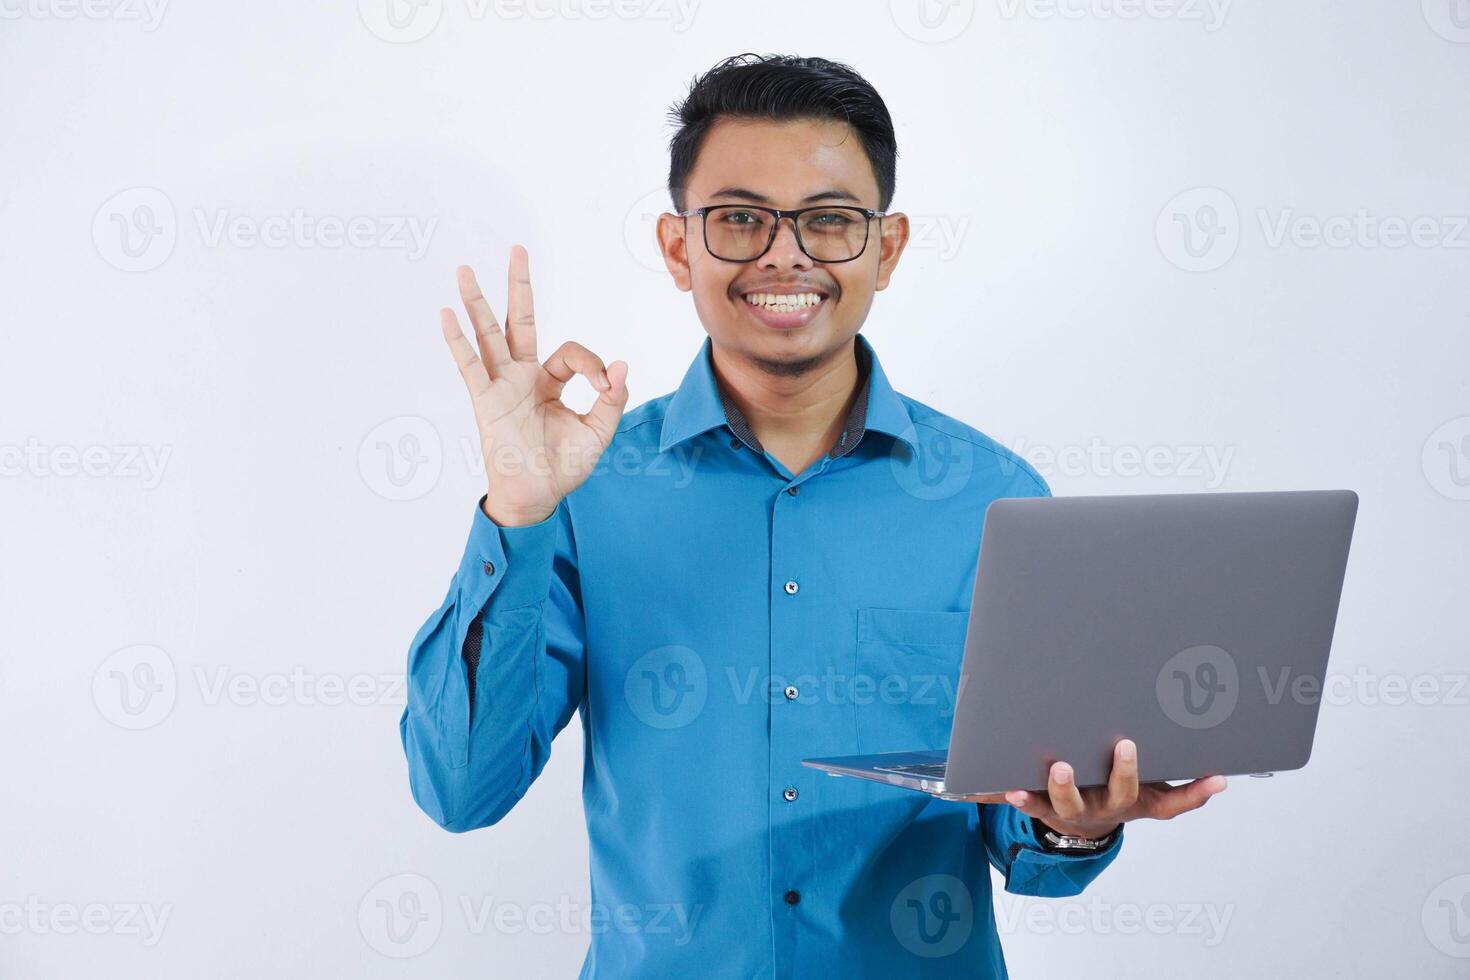 smiling or happy asian man with glasses gesturing hand OK or done and holding laptop wearing blue shirt isolated on white background photo